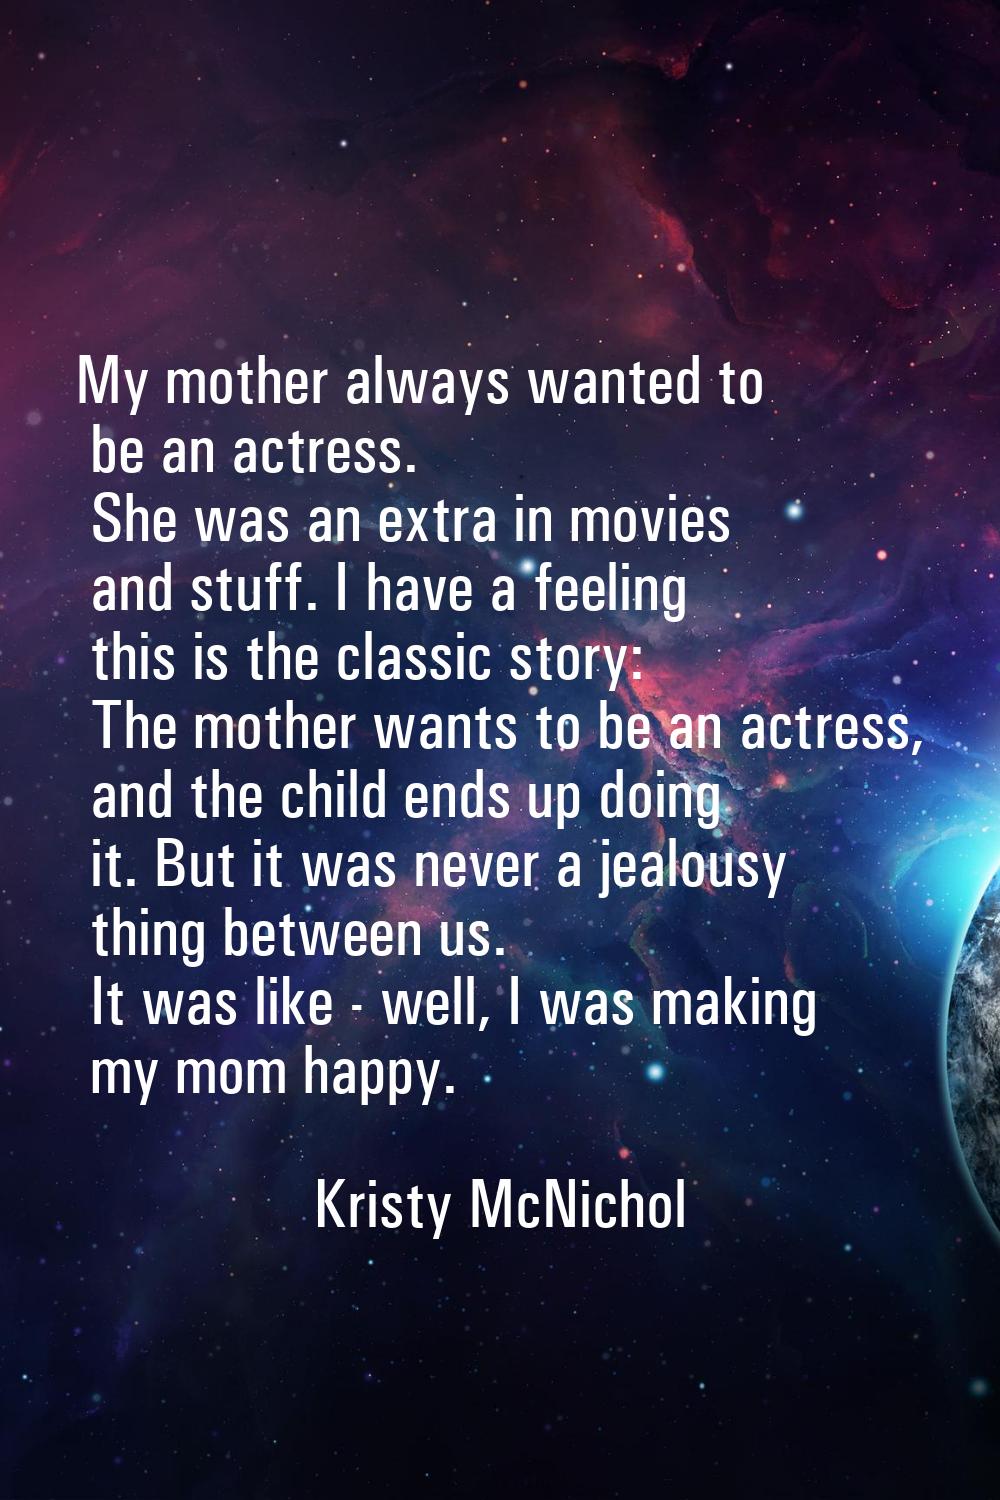 My mother always wanted to be an actress. She was an extra in movies and stuff. I have a feeling th